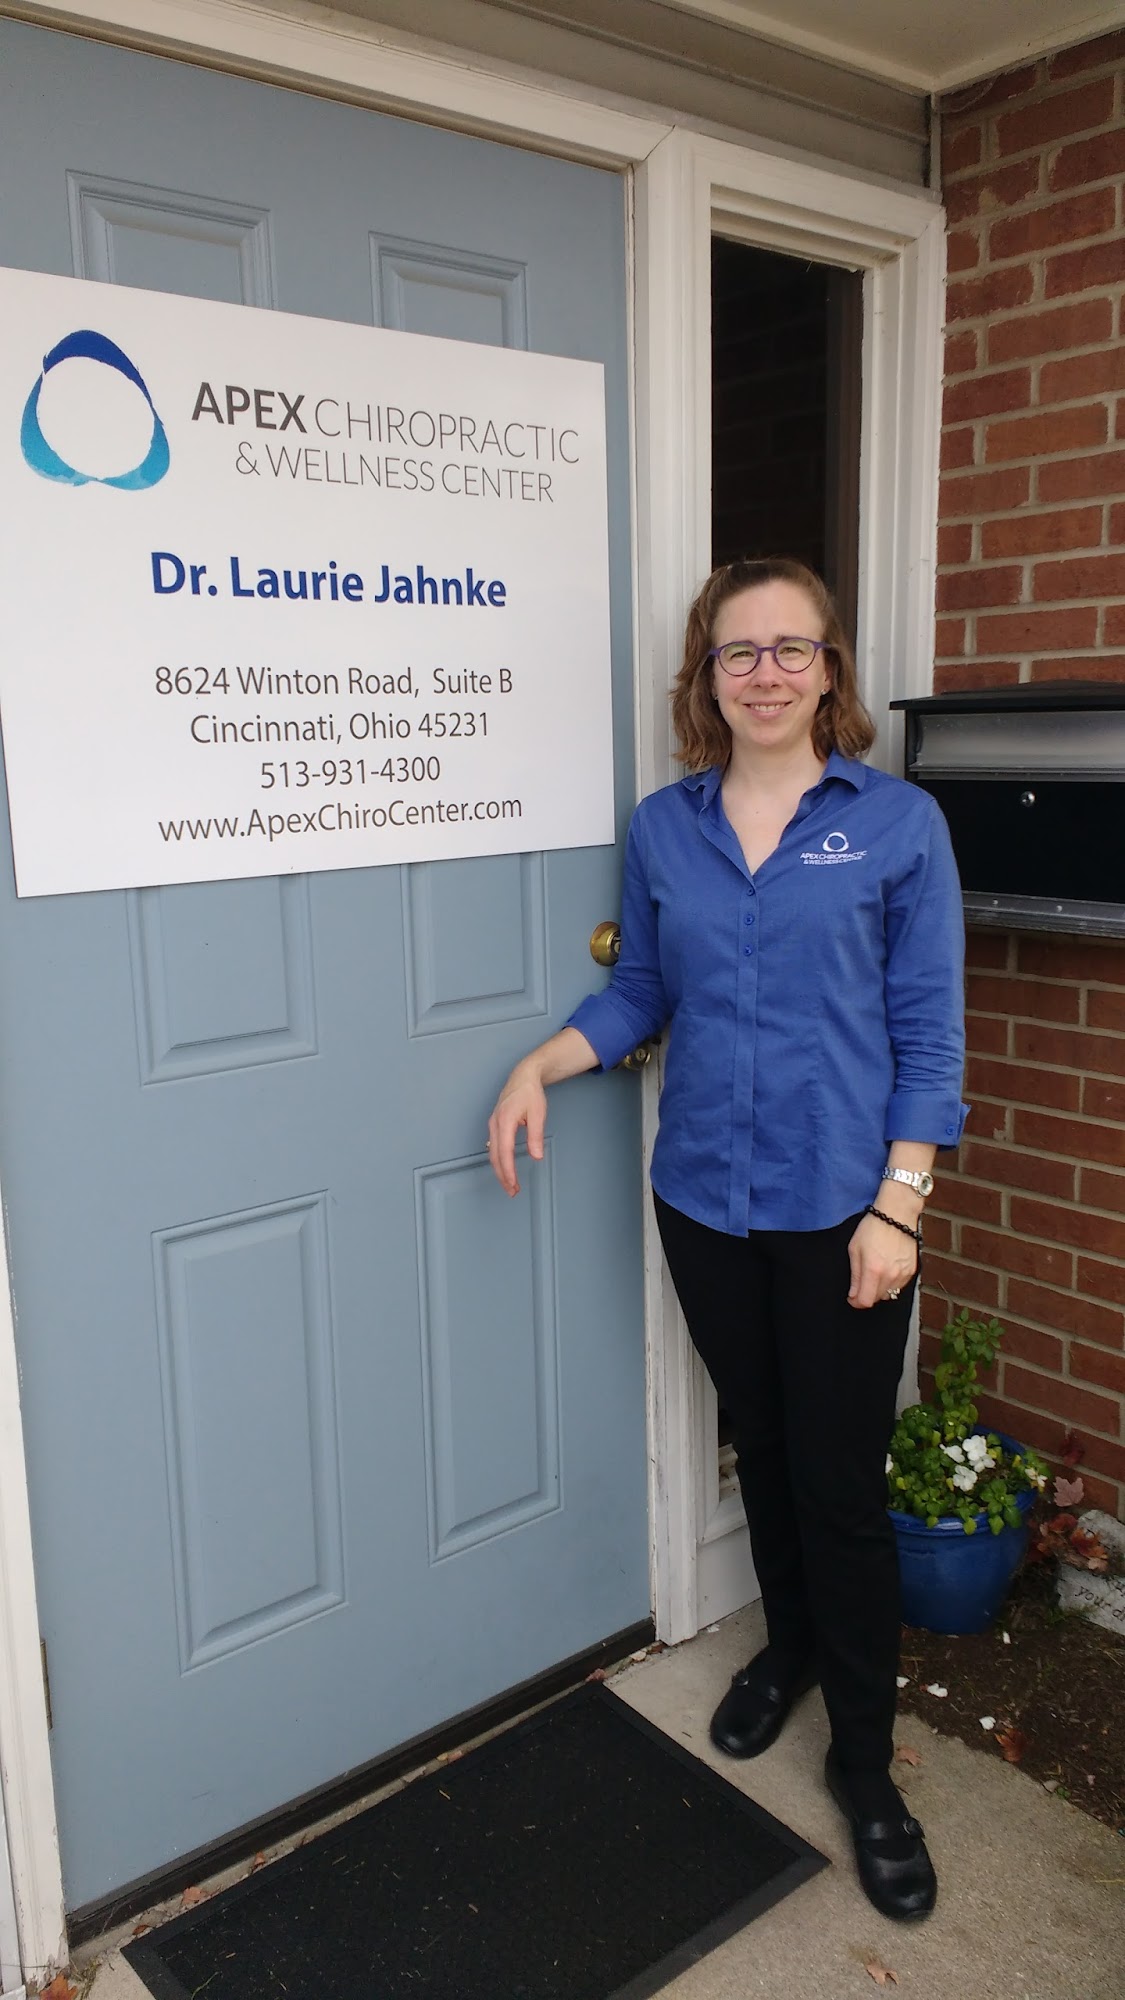 Apex Chiropractic & Wellness Center: Dr. Laurie Jahnke DC & Dr. Stephan Moje DC